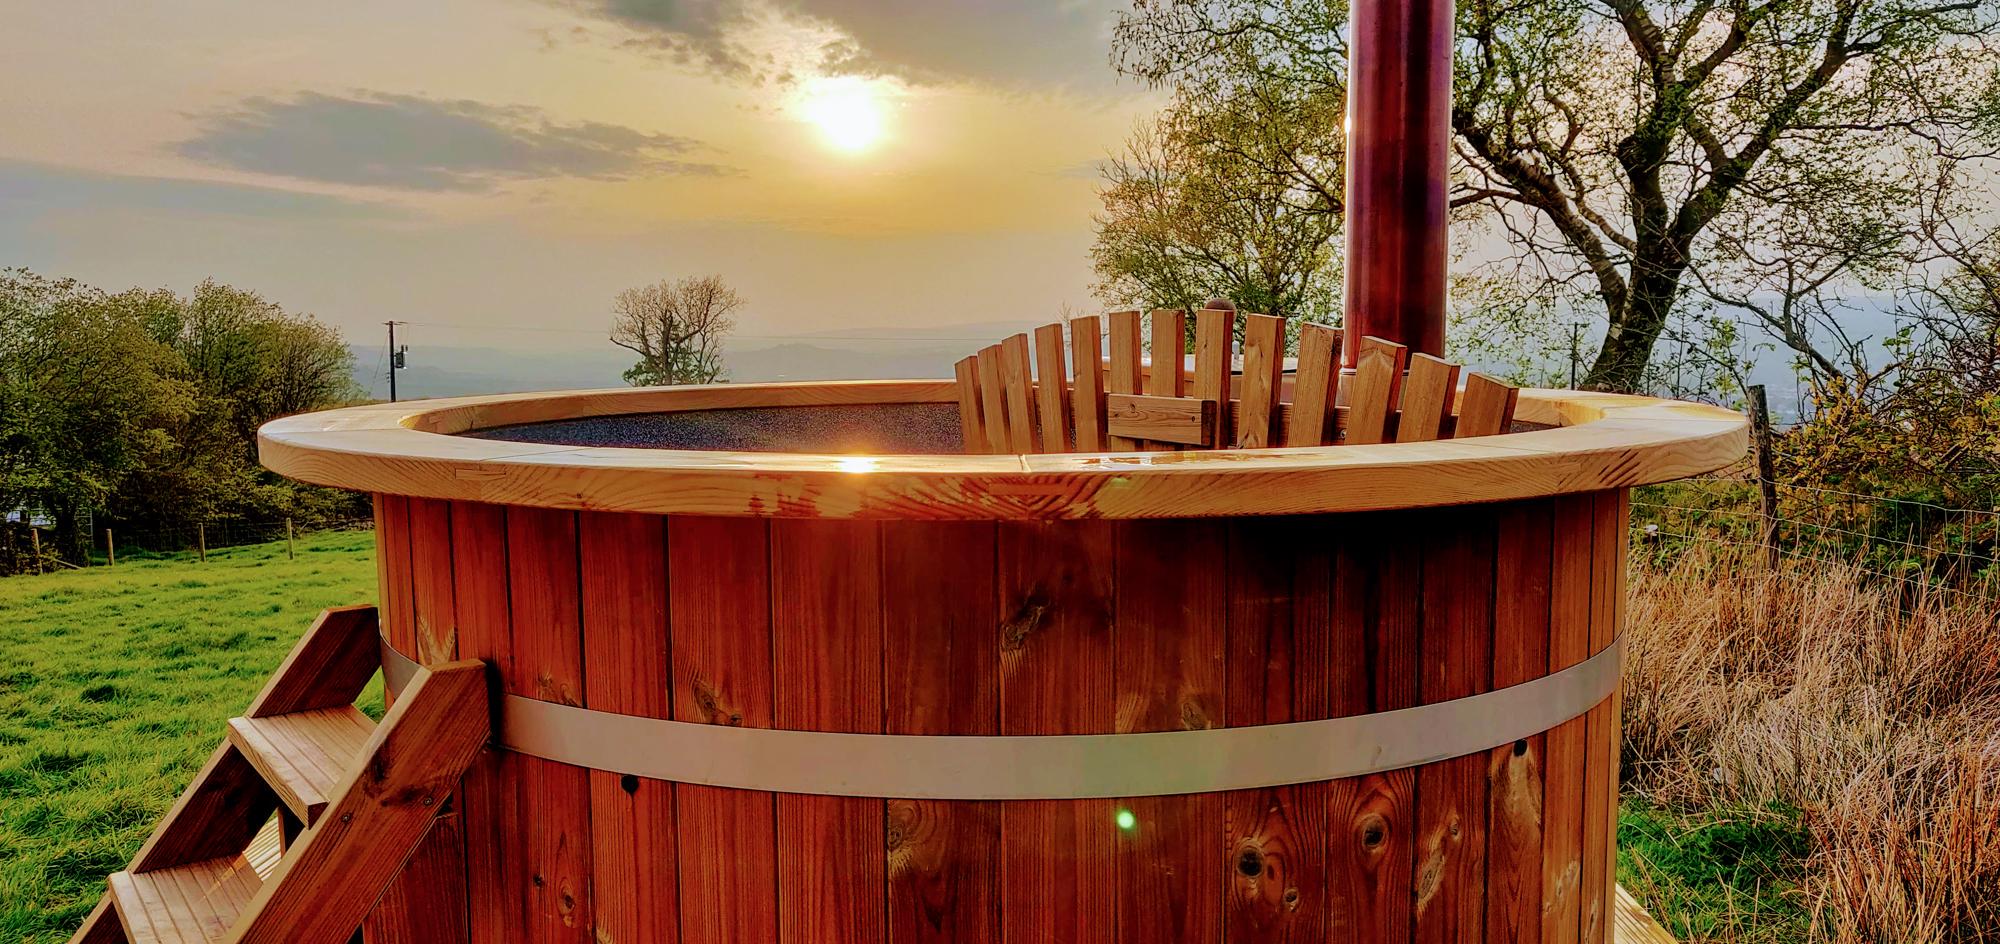 Glamping sites with hot tubs in the Brecon Beacons National Park